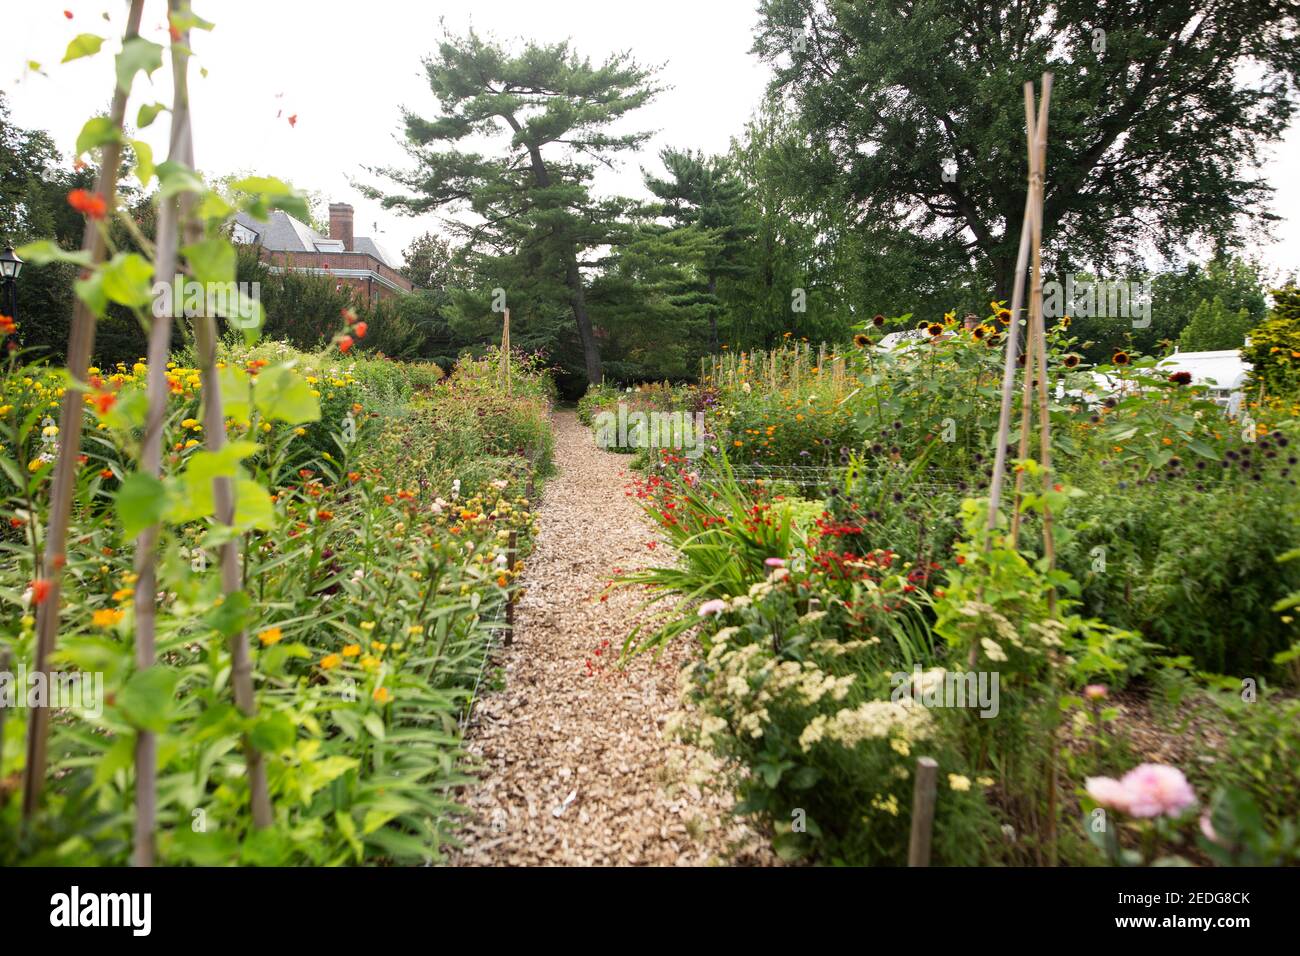 The cutting garden at Hillwood, the estate of Marjorie Merriweather Post in Washington, DC, USA. This garden provided fresh flowers for the house. Stock Photo